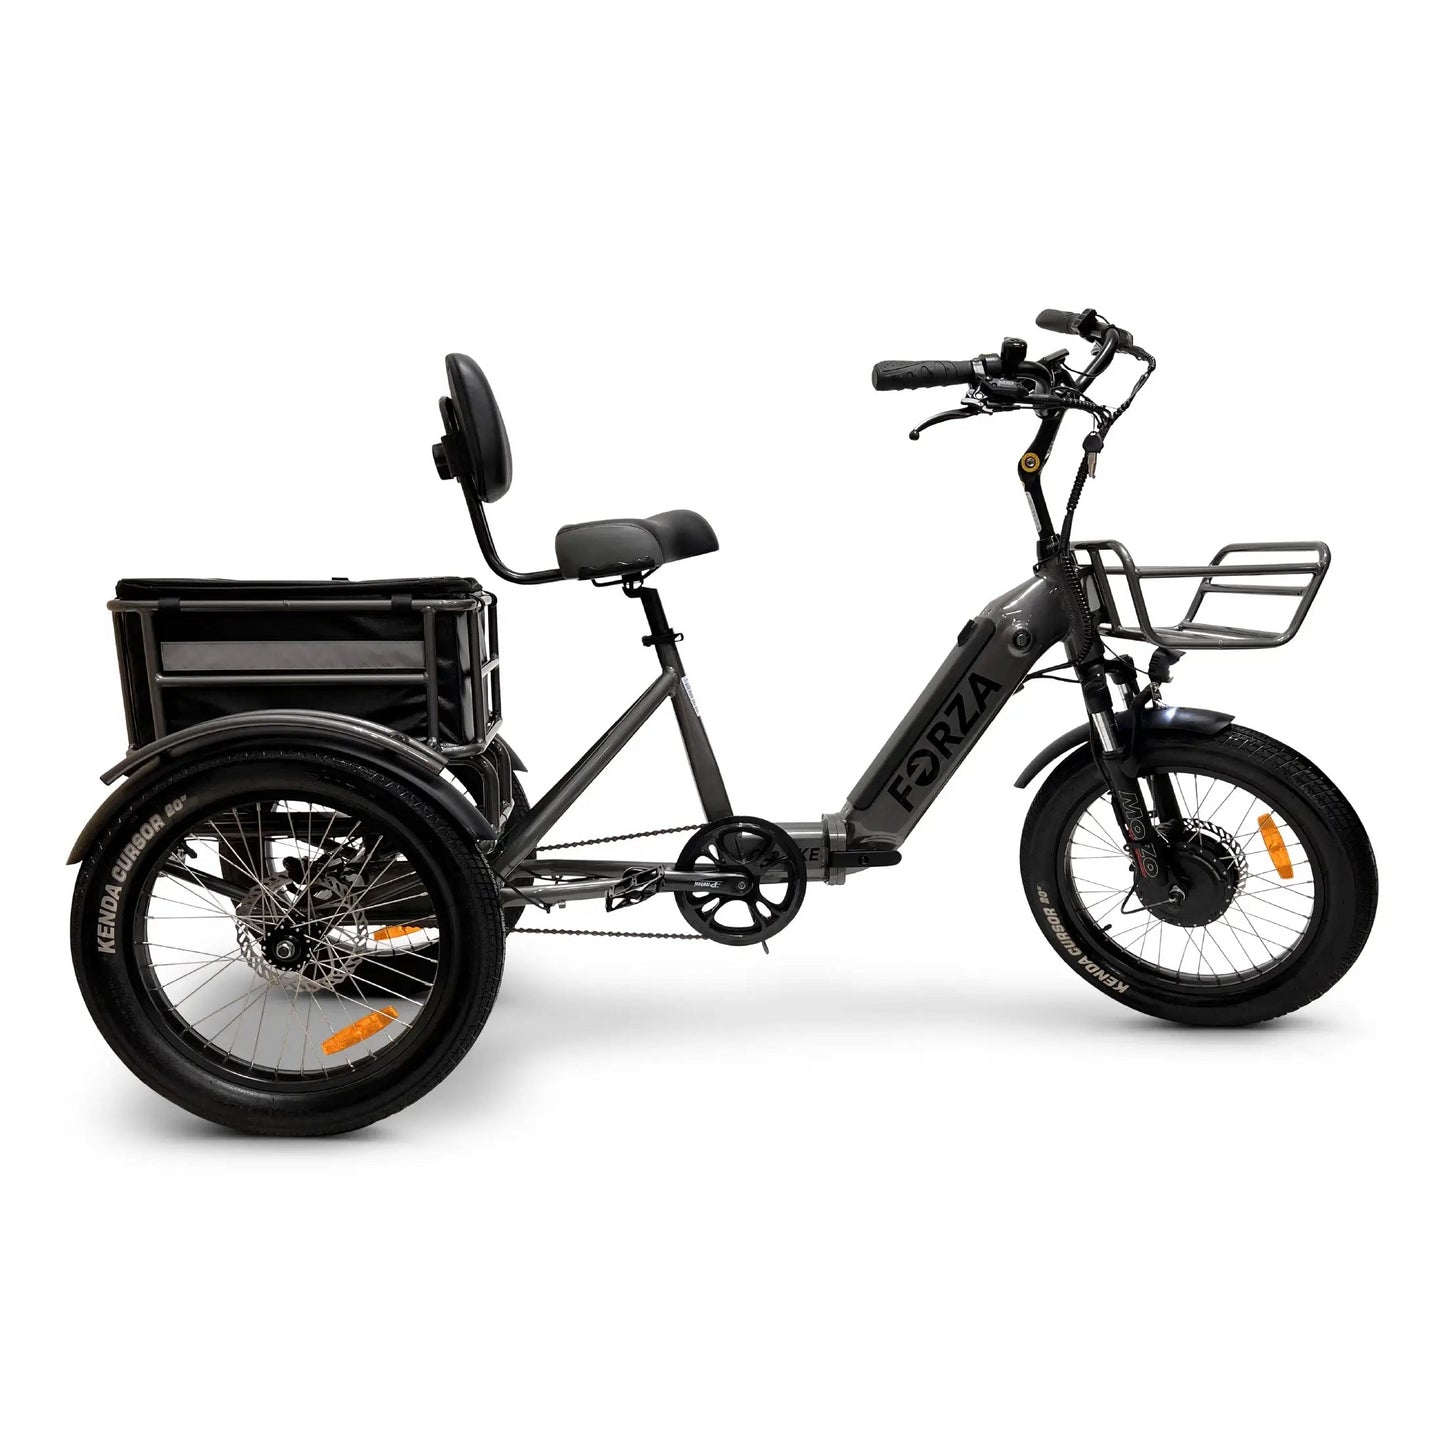 GOBIKE FORZA Compact Foldable Electric Tricycle-My Perfect Scooter